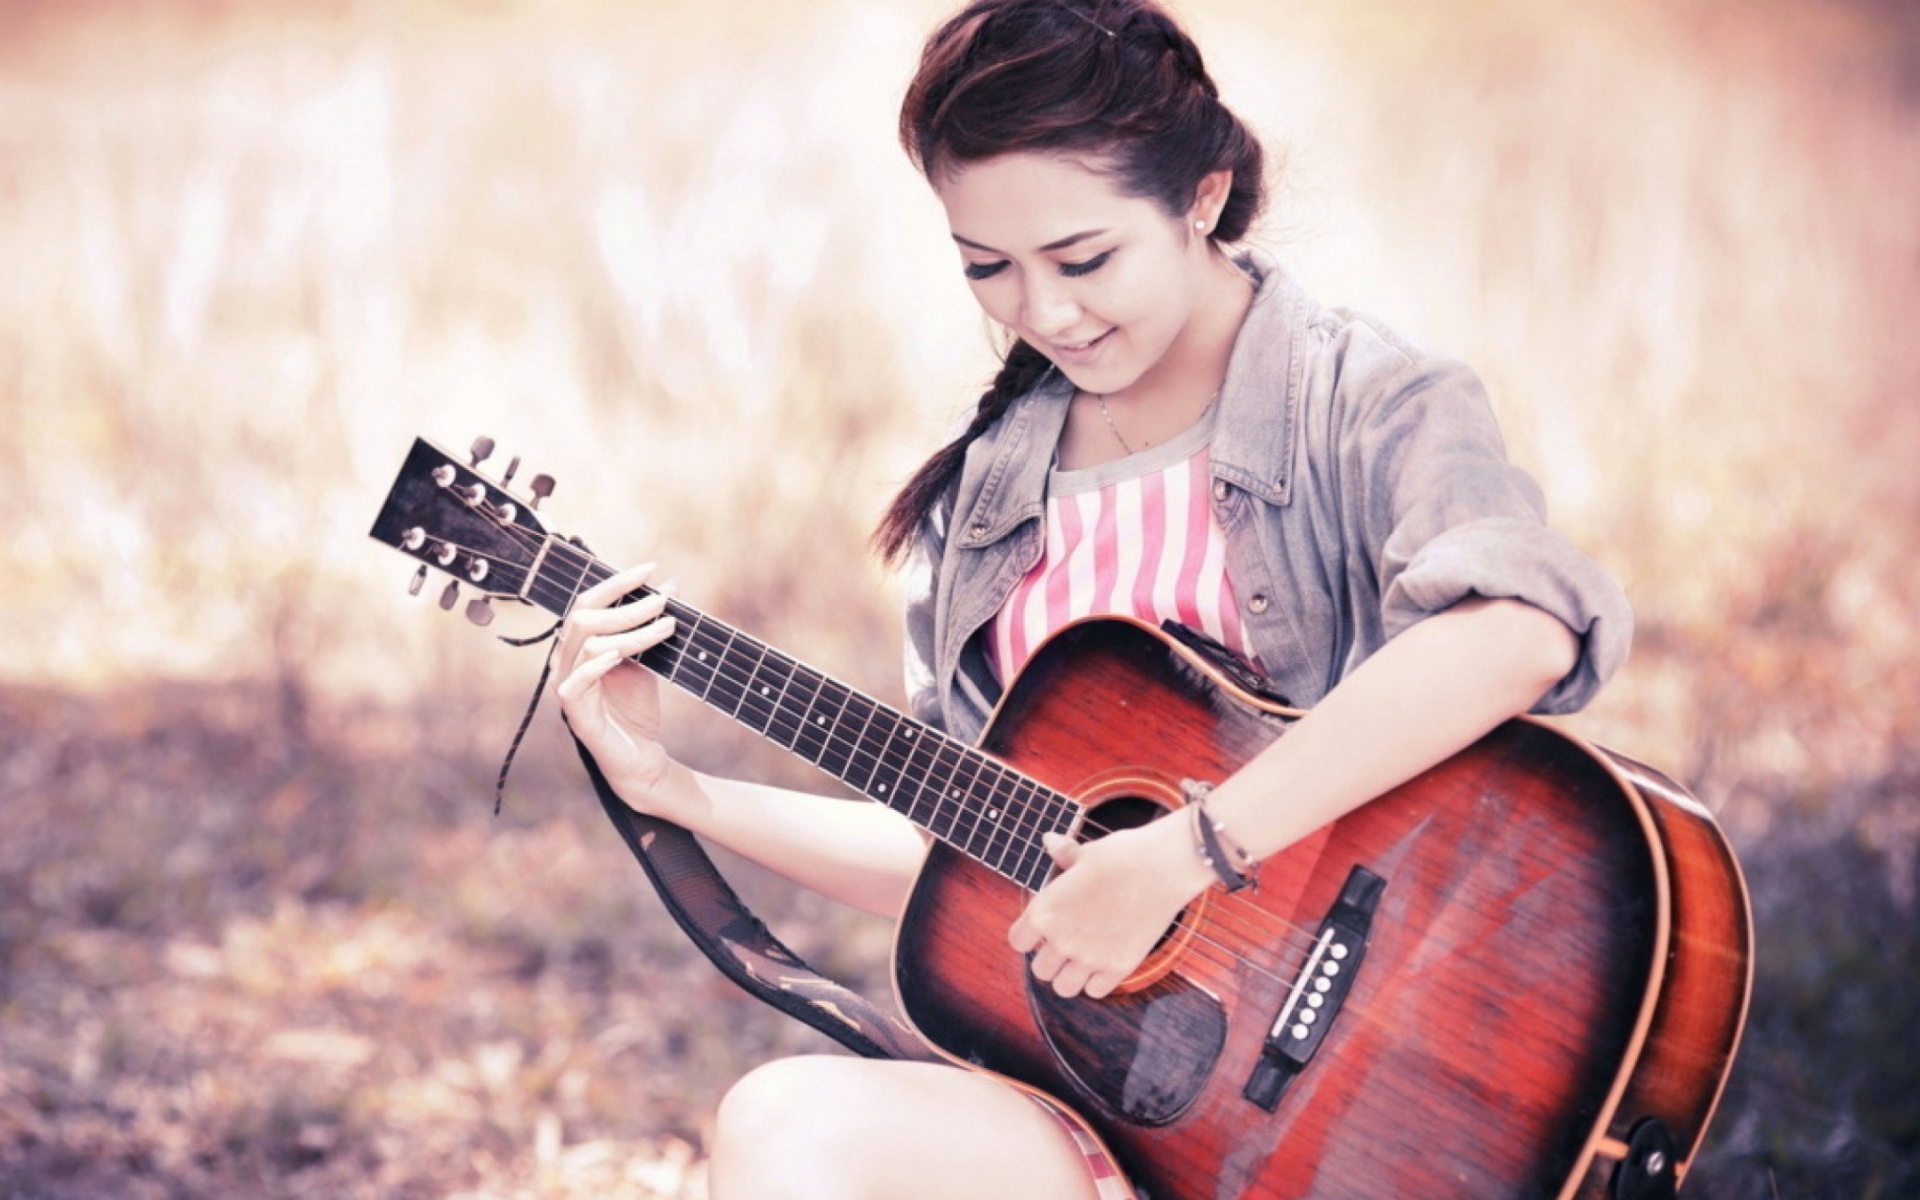 Chinese girl with guitar wallpaper 1920x1200